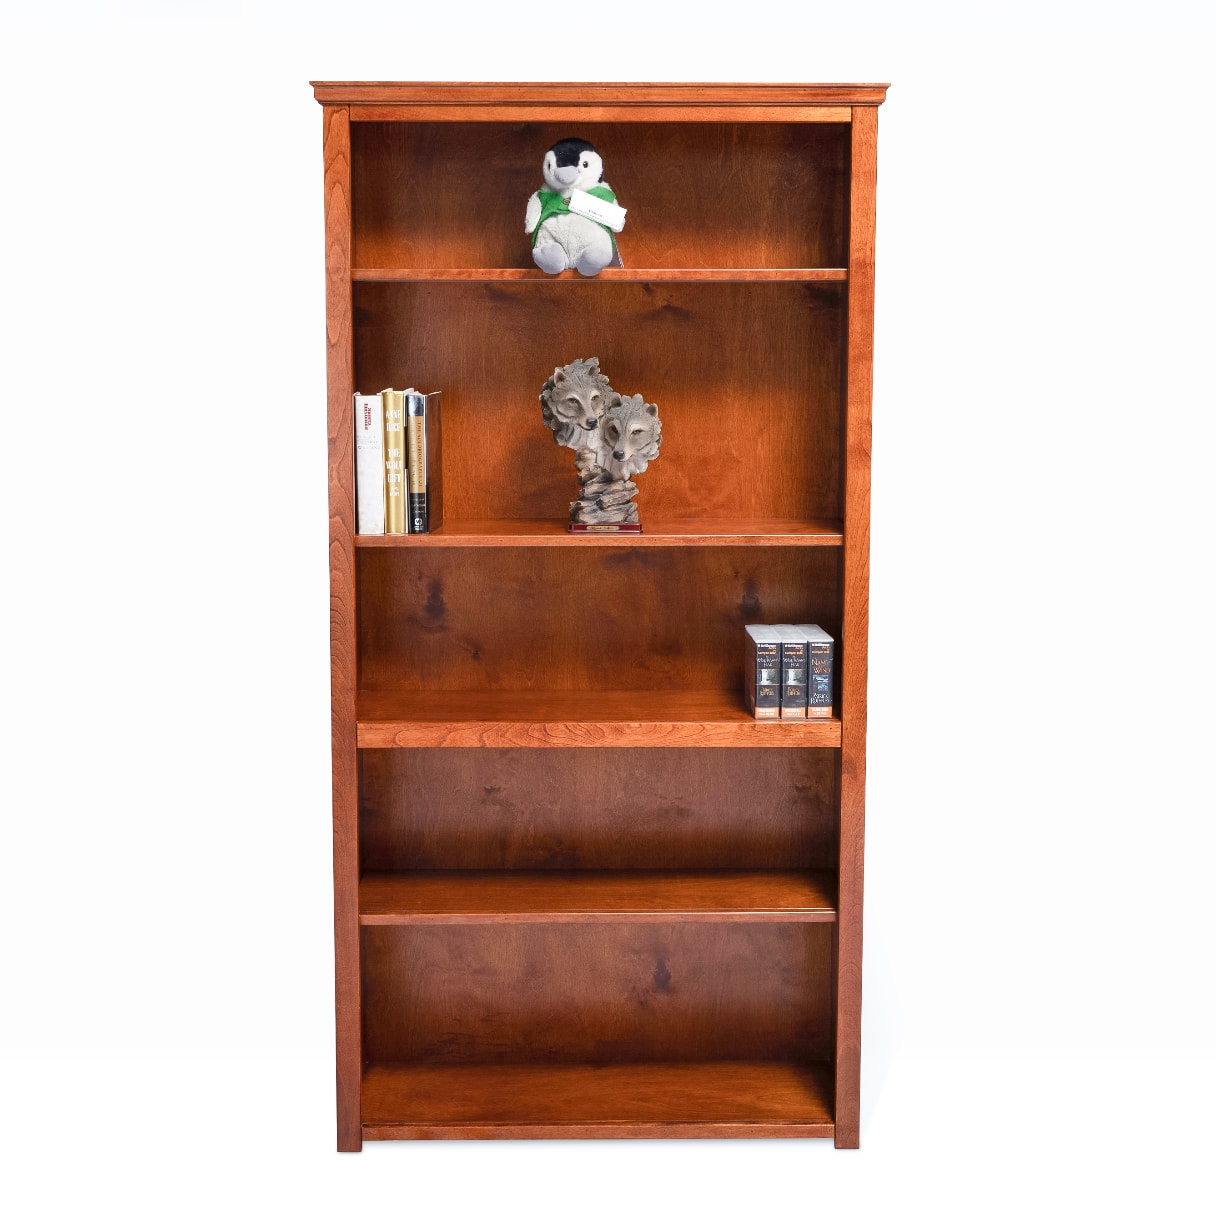 Berkshire Plymouth Bookcase is built in birch and features adjustable shelving. Shown in Orange Walnut finish.